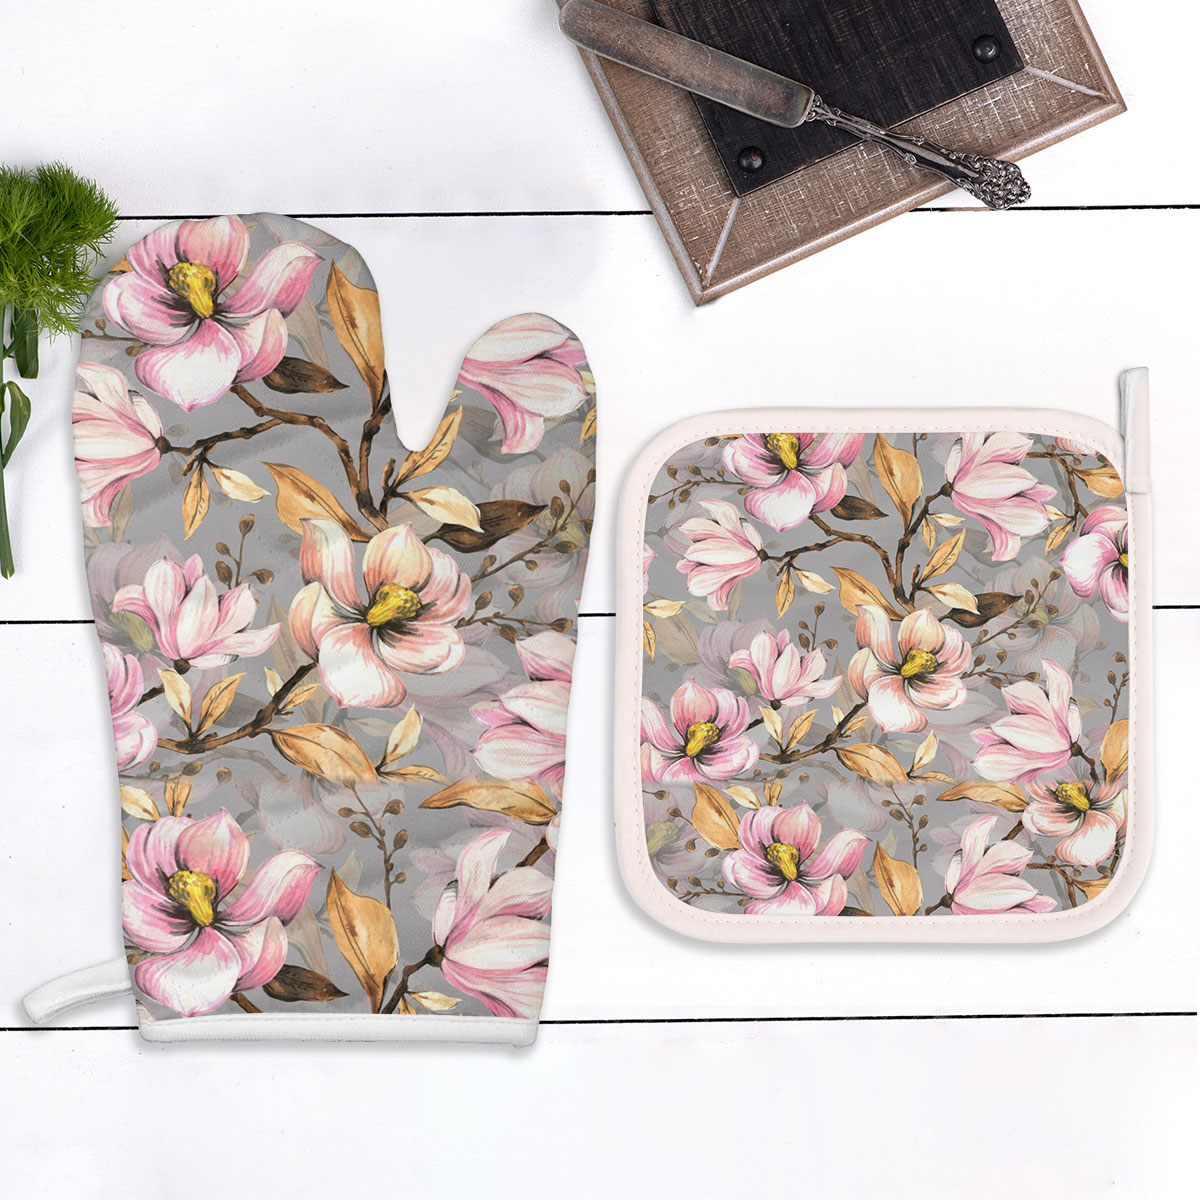 Abstract Magnolia Flowers Oven Mitts Pot Holder Set